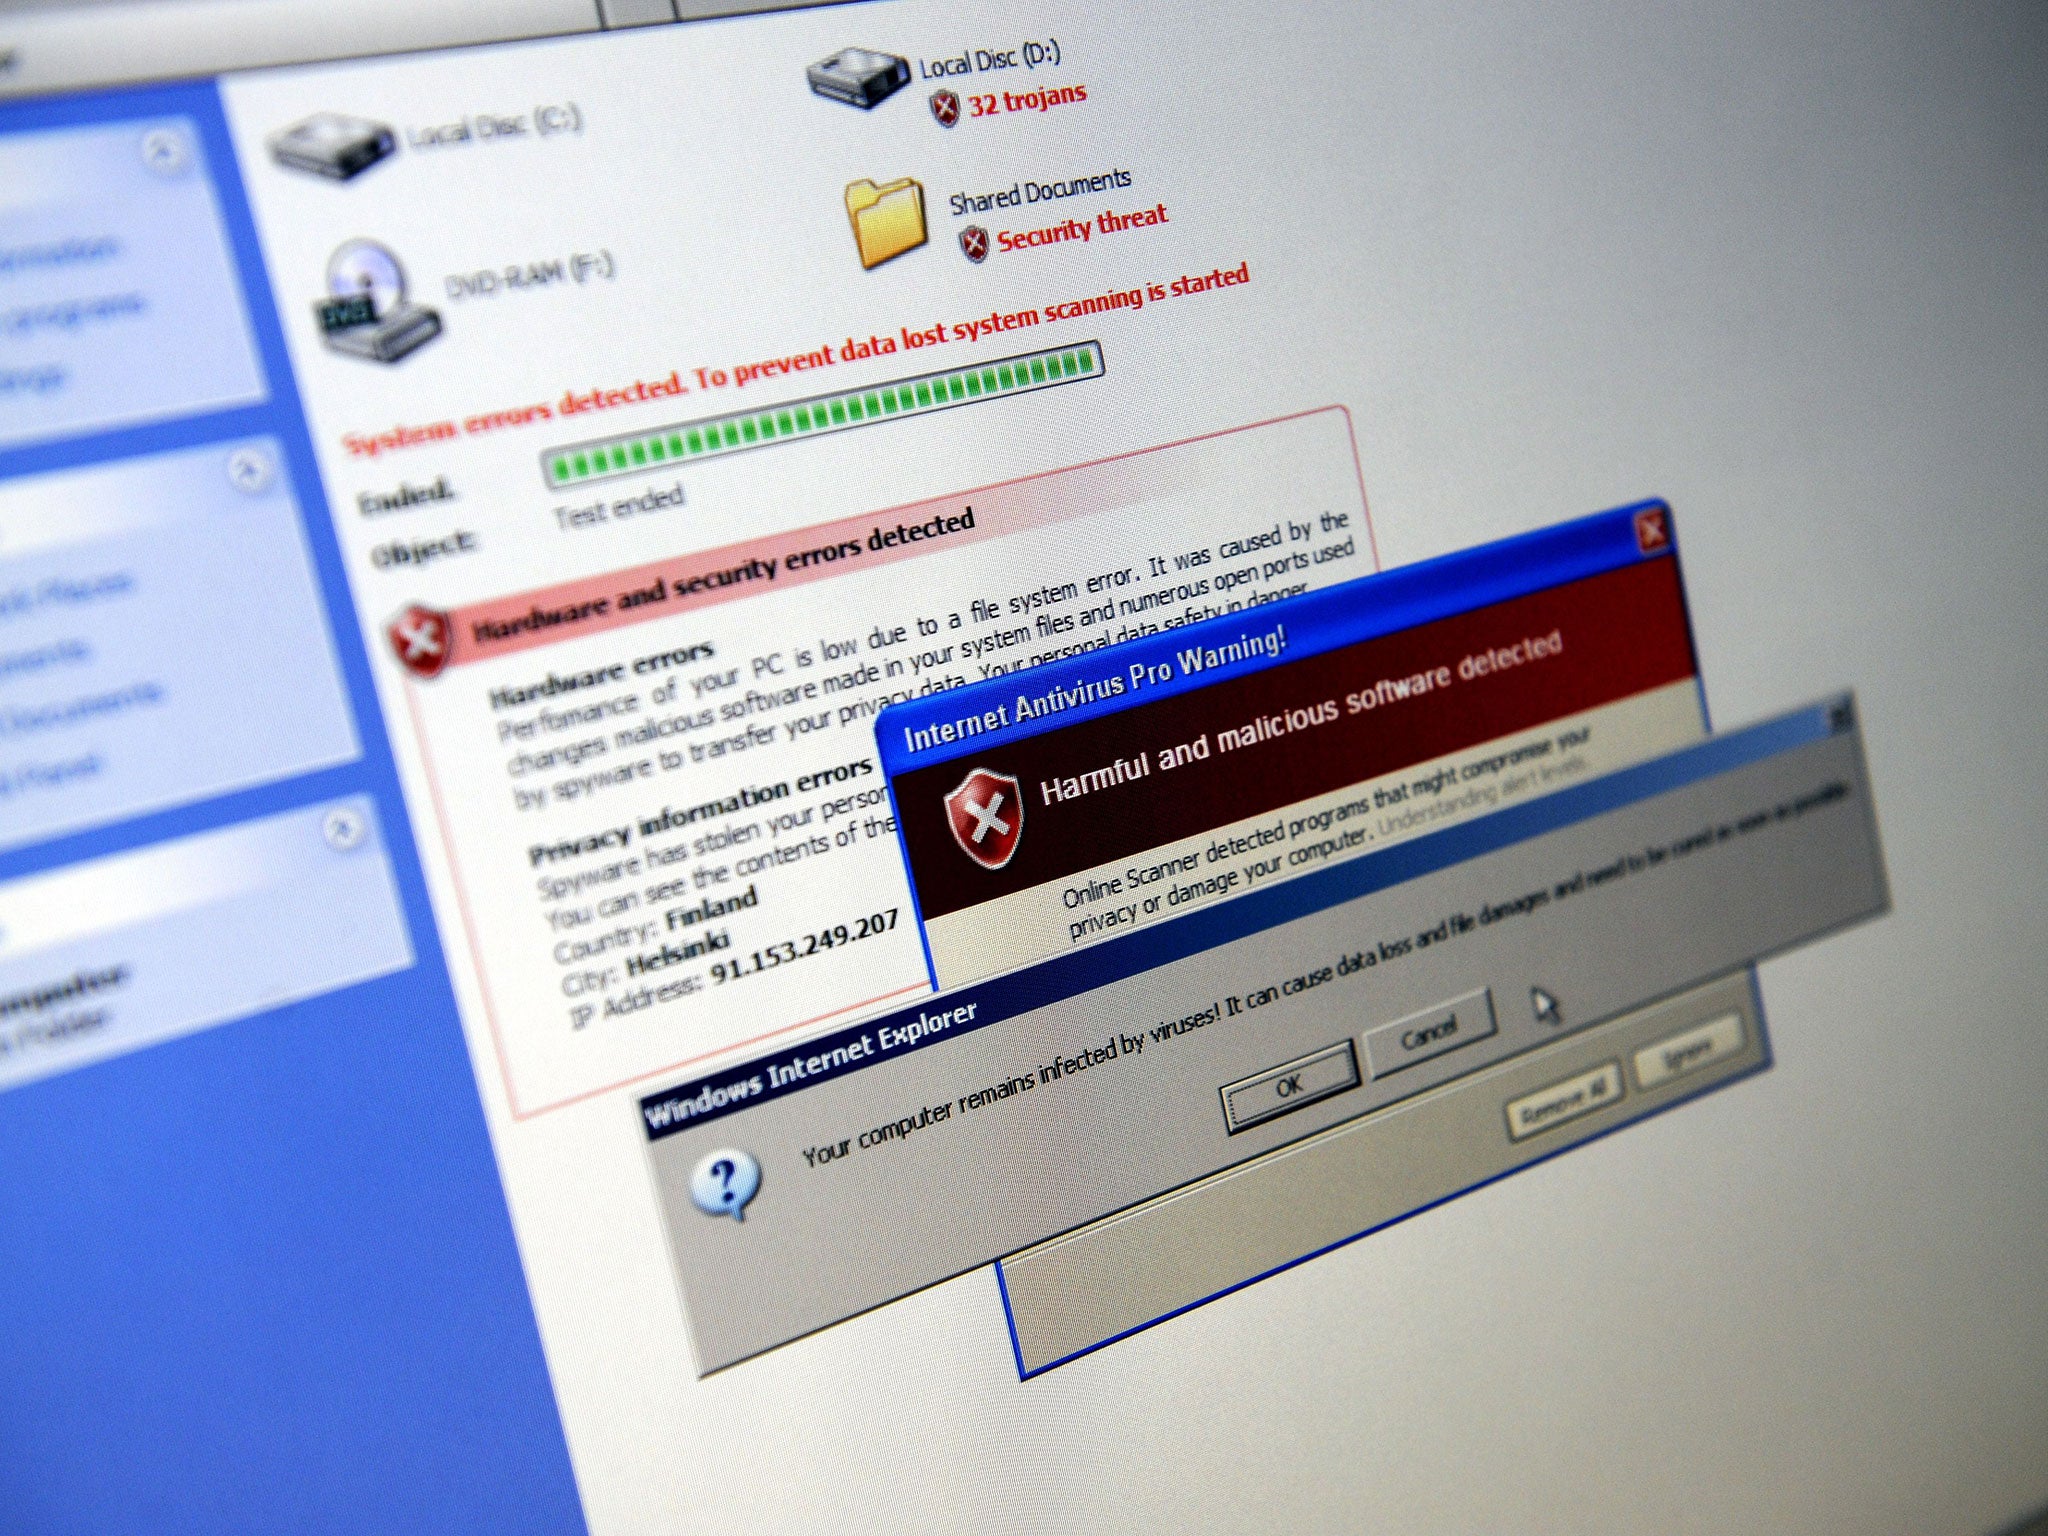 malicious software removal tool 64